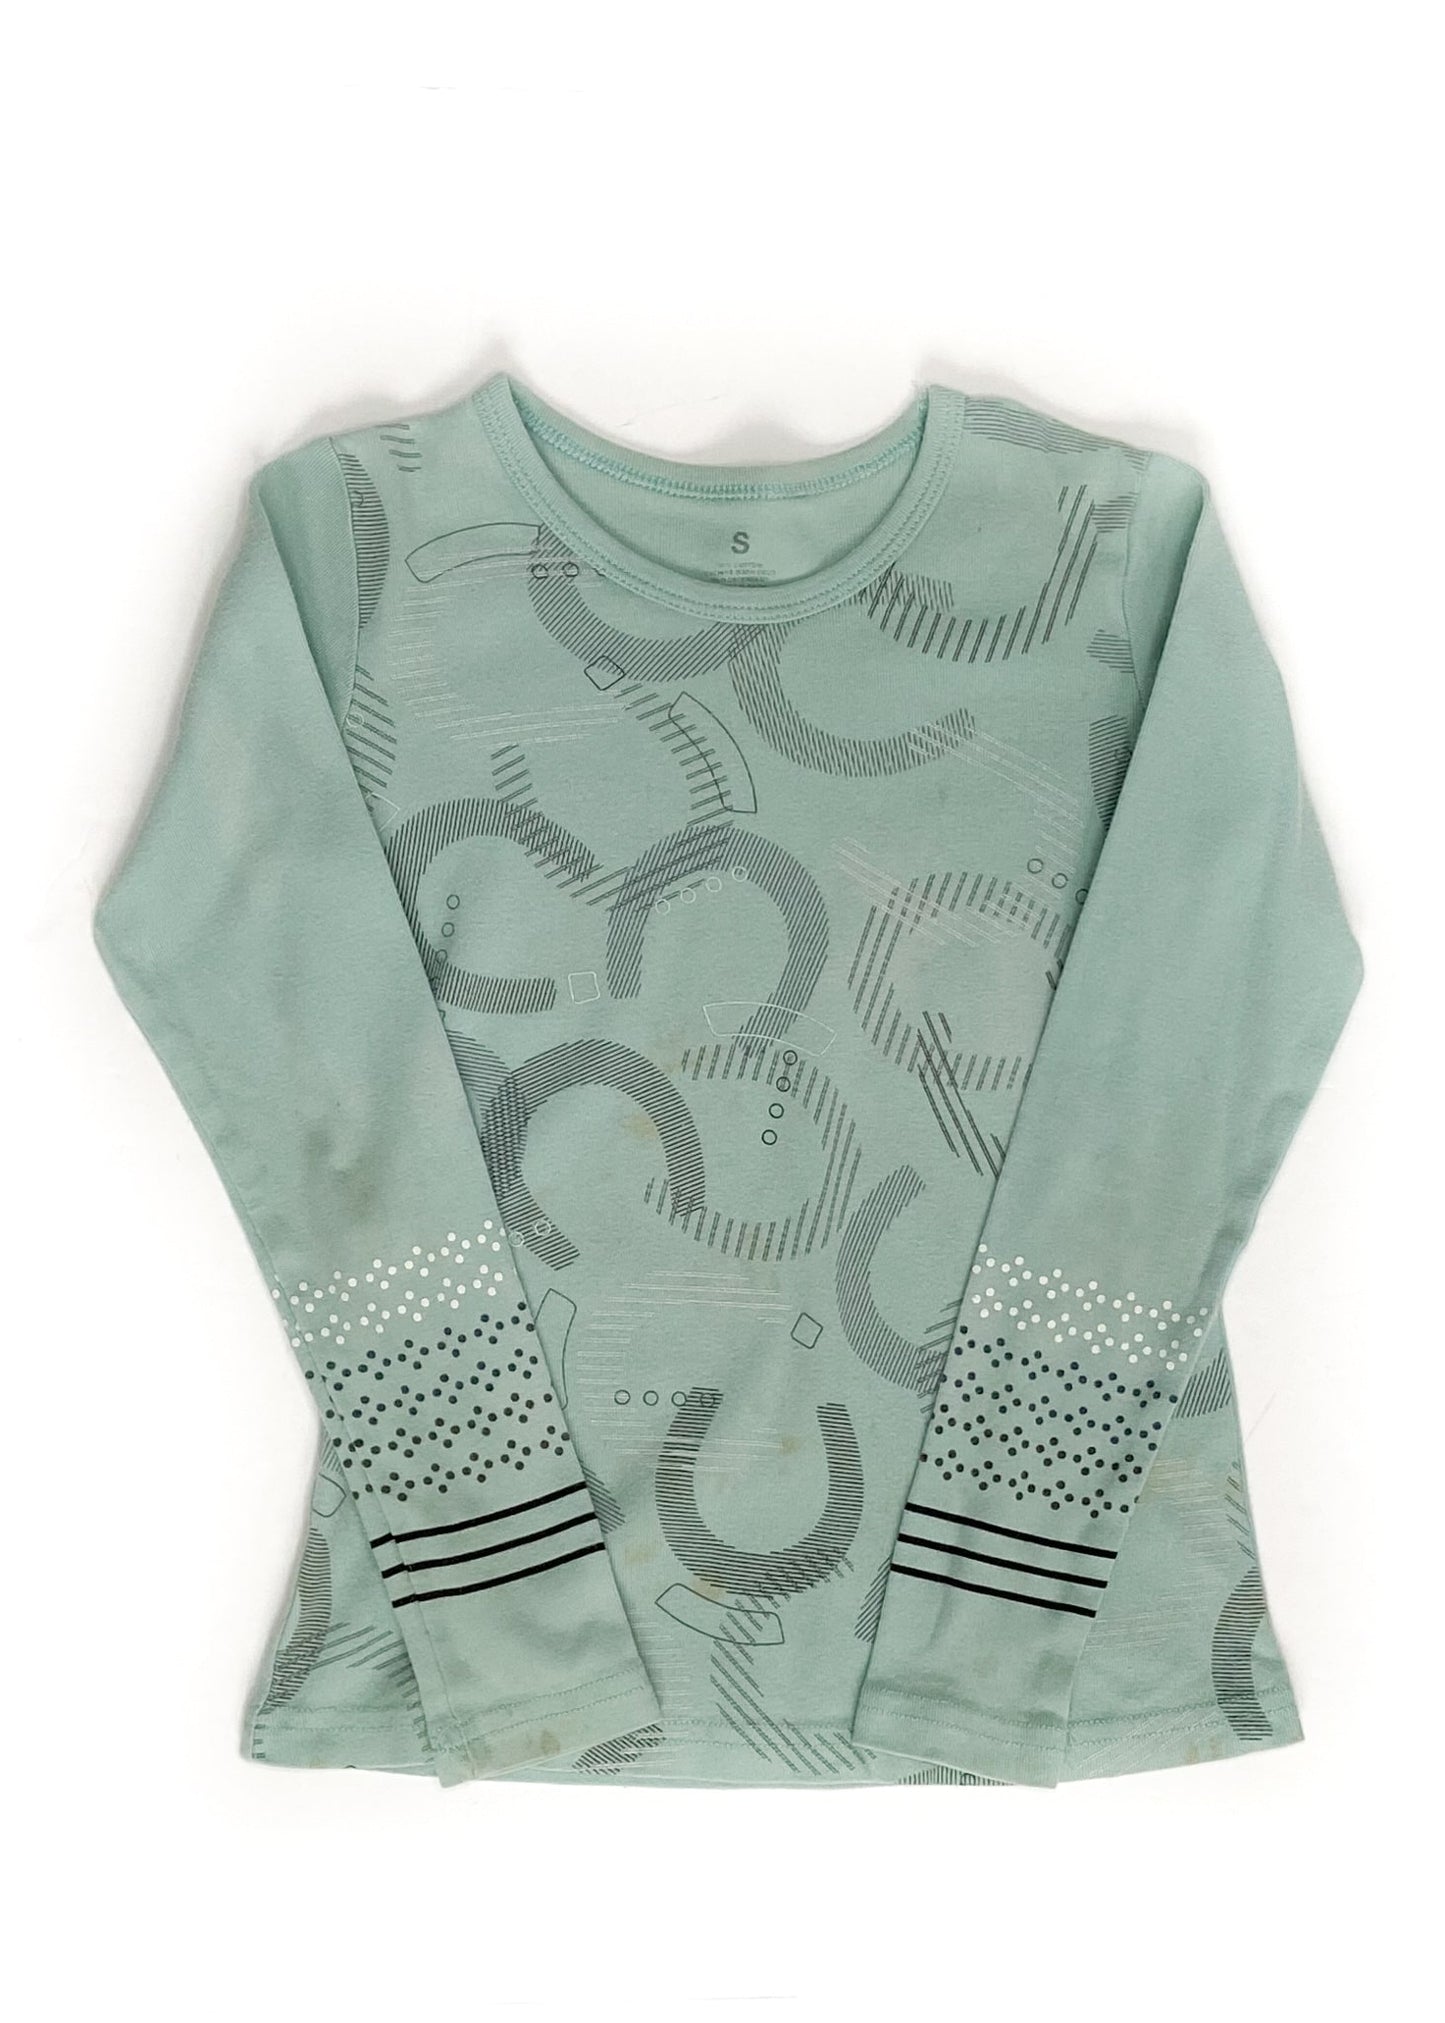 Kerrits Long Sleeve Top - Teal - Youth Small